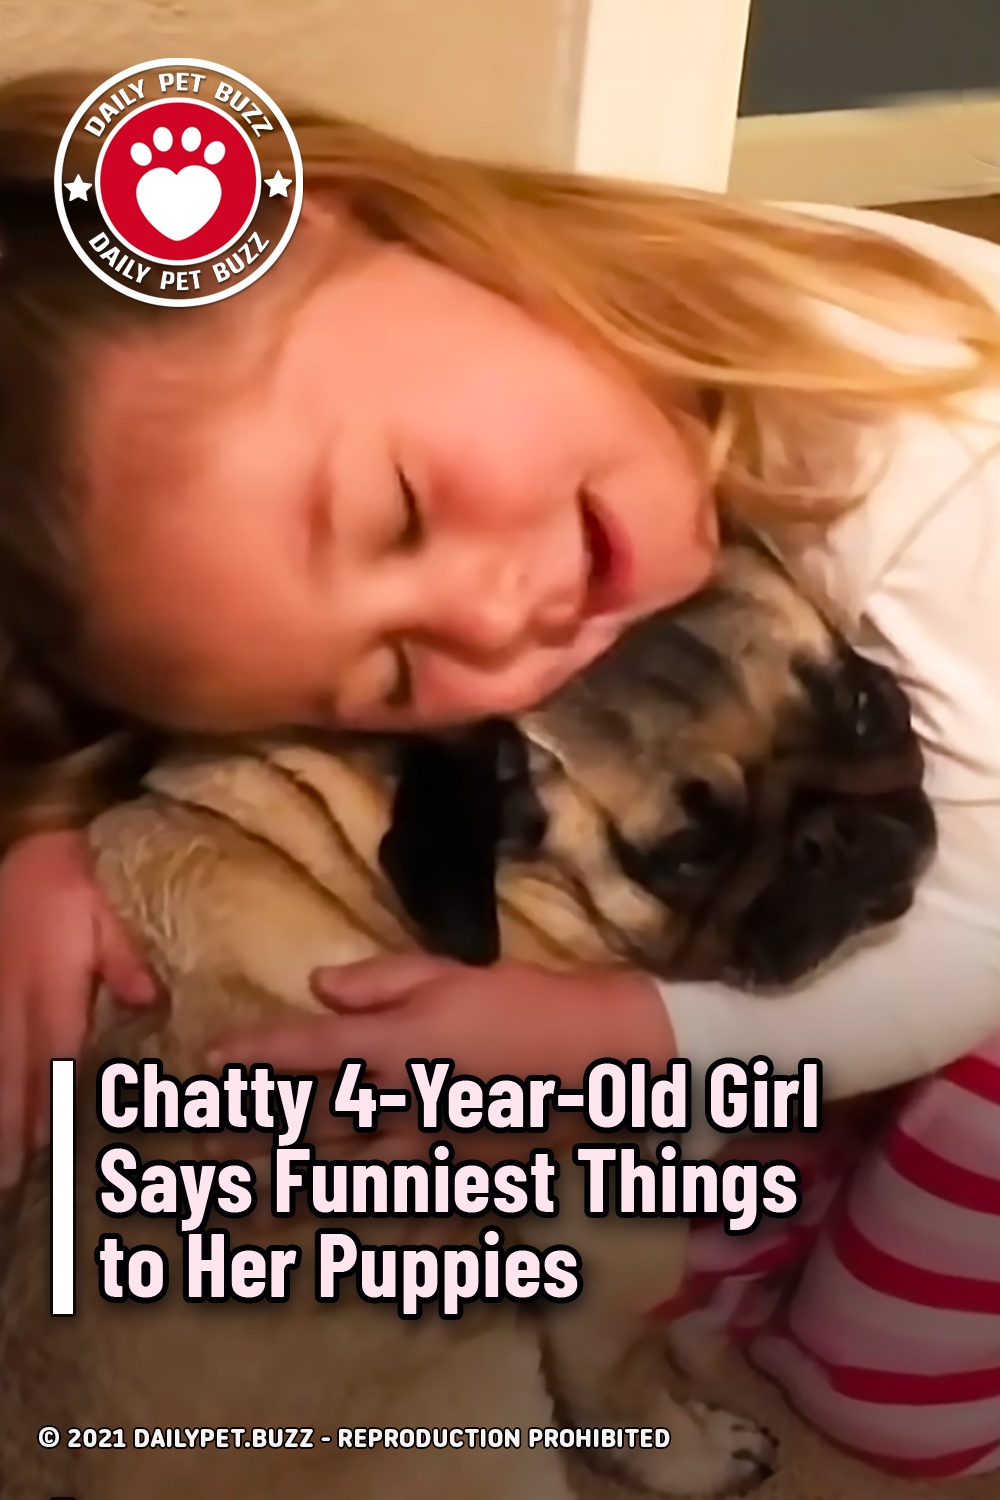 Chatty 4-Year-Old Girl Says Funniest Things to Her Puppies